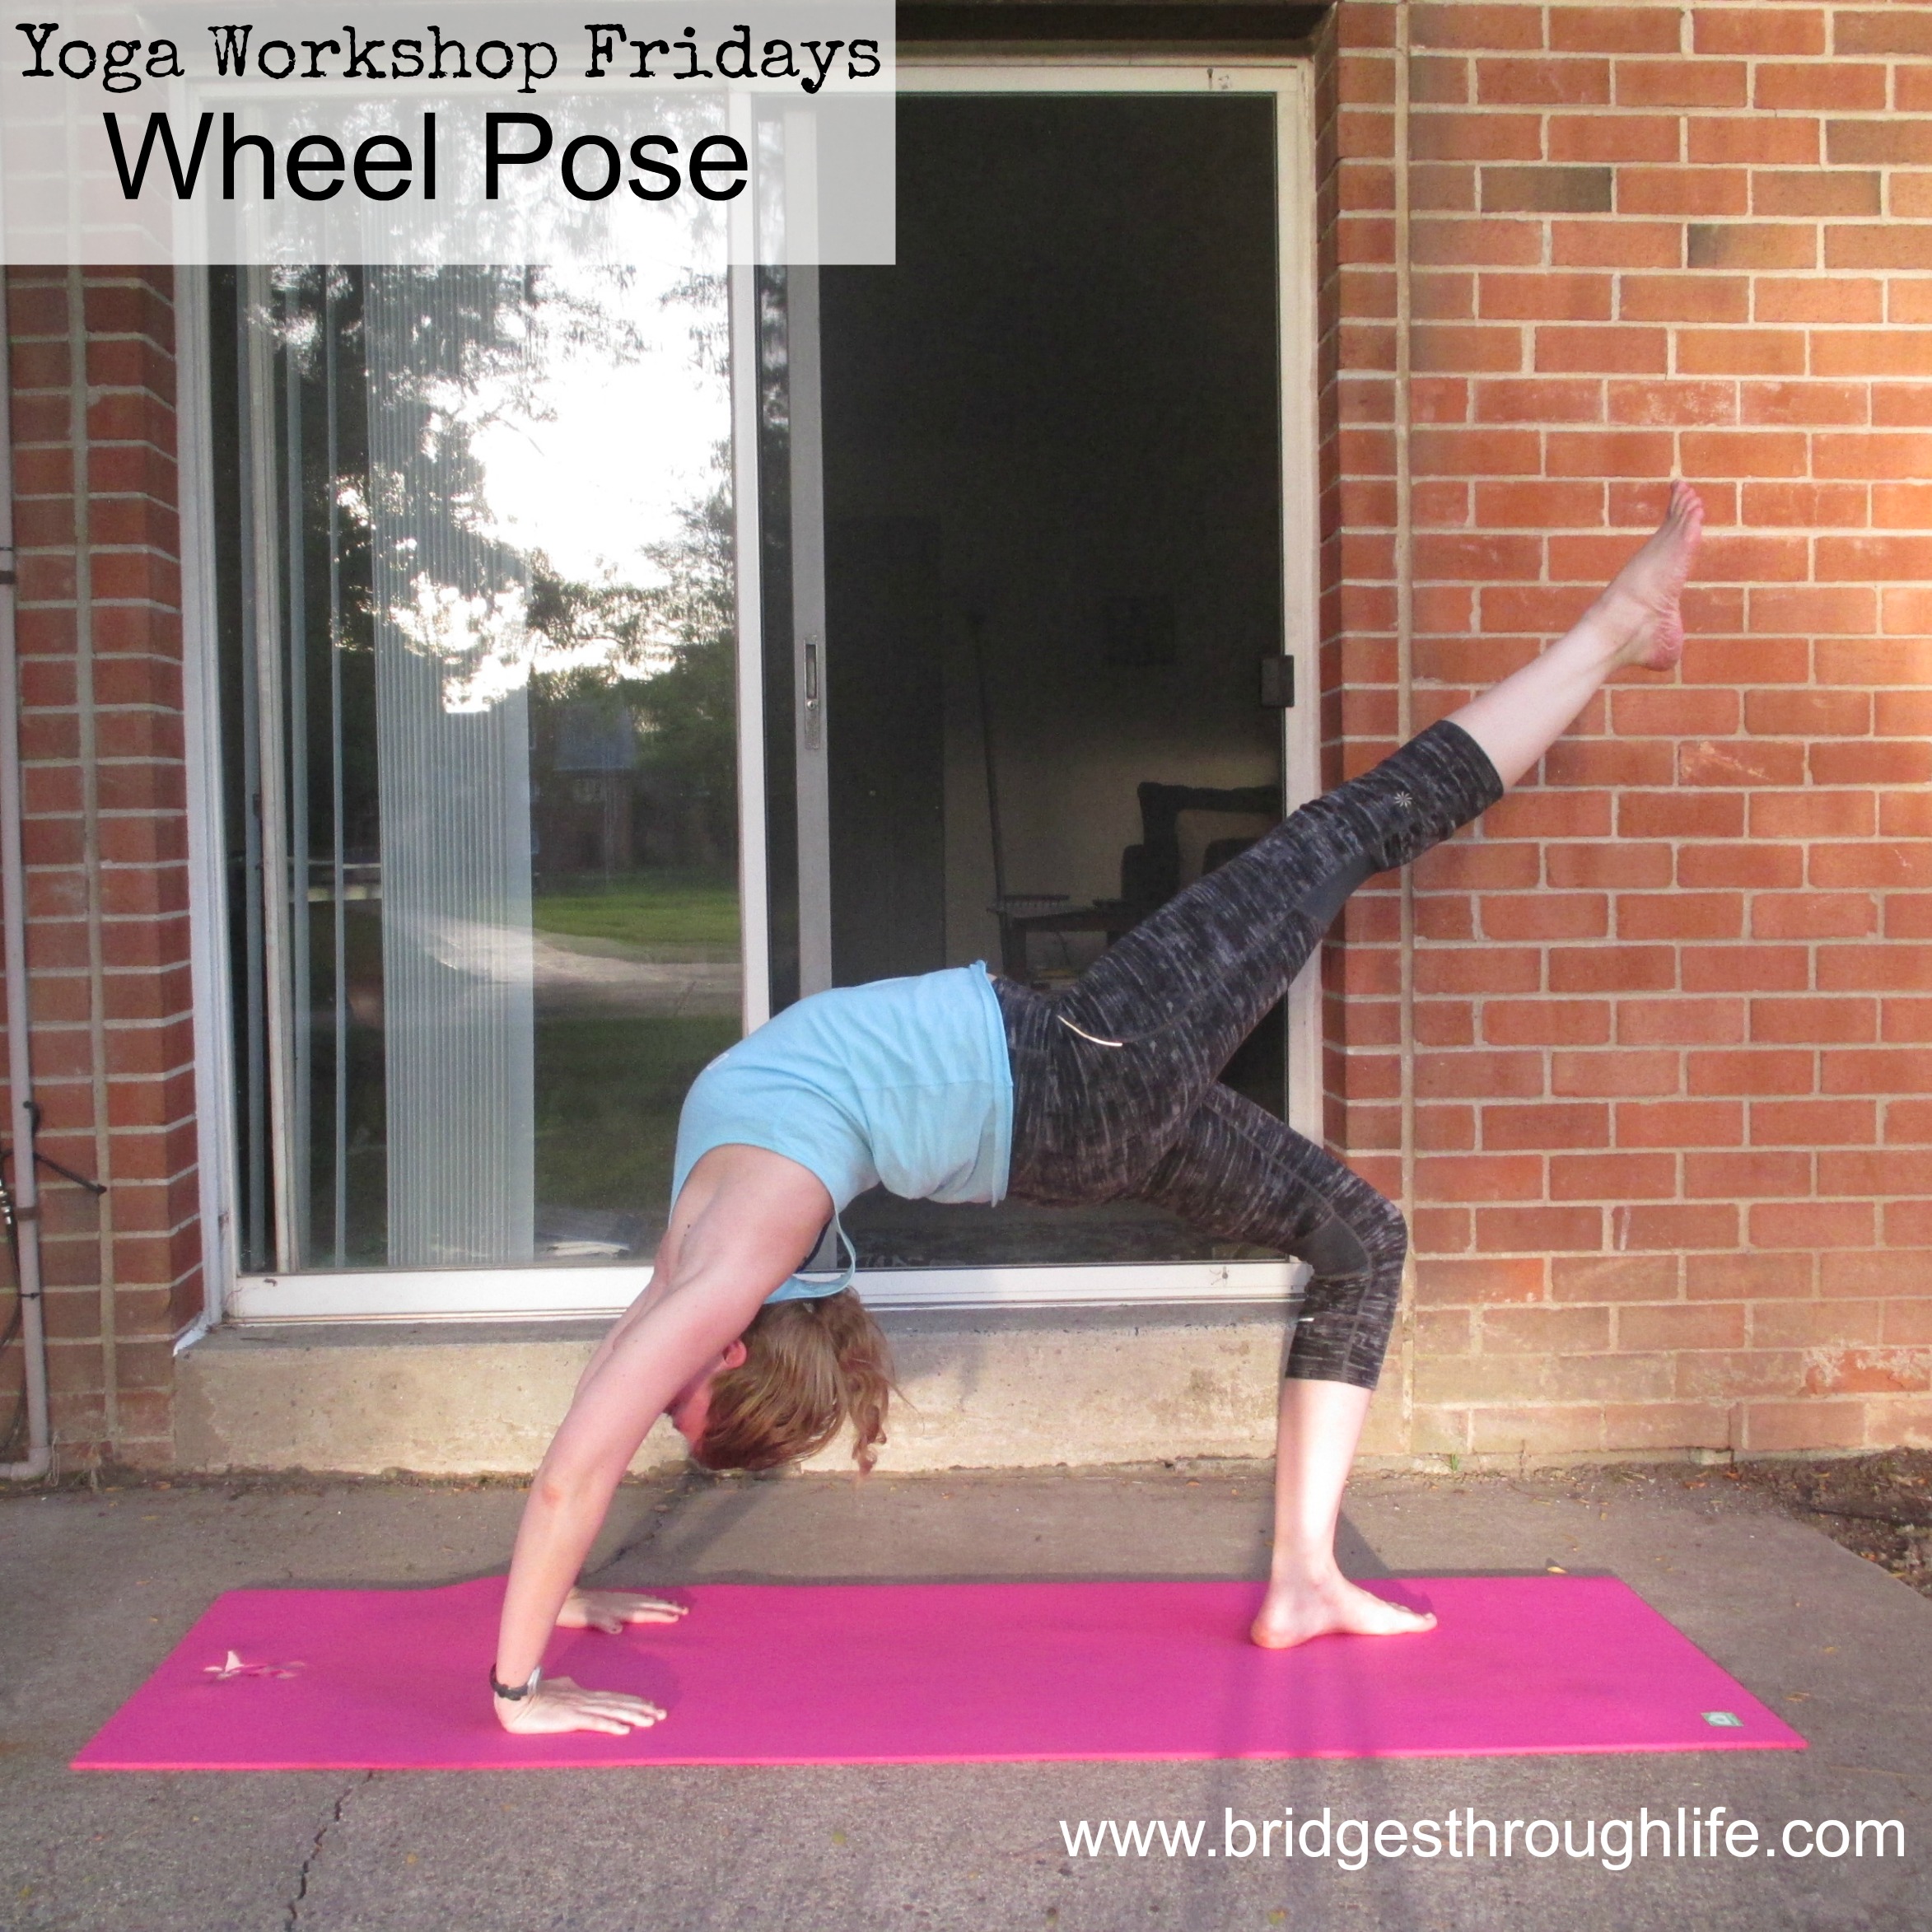 ✳️ WHEEL POSE VARIATIONS ✳️ - One-Legged Wheel - One-Armed Wheel - Head to  Foot Wheel ( this one is damn hard as it involves b... | Instagram